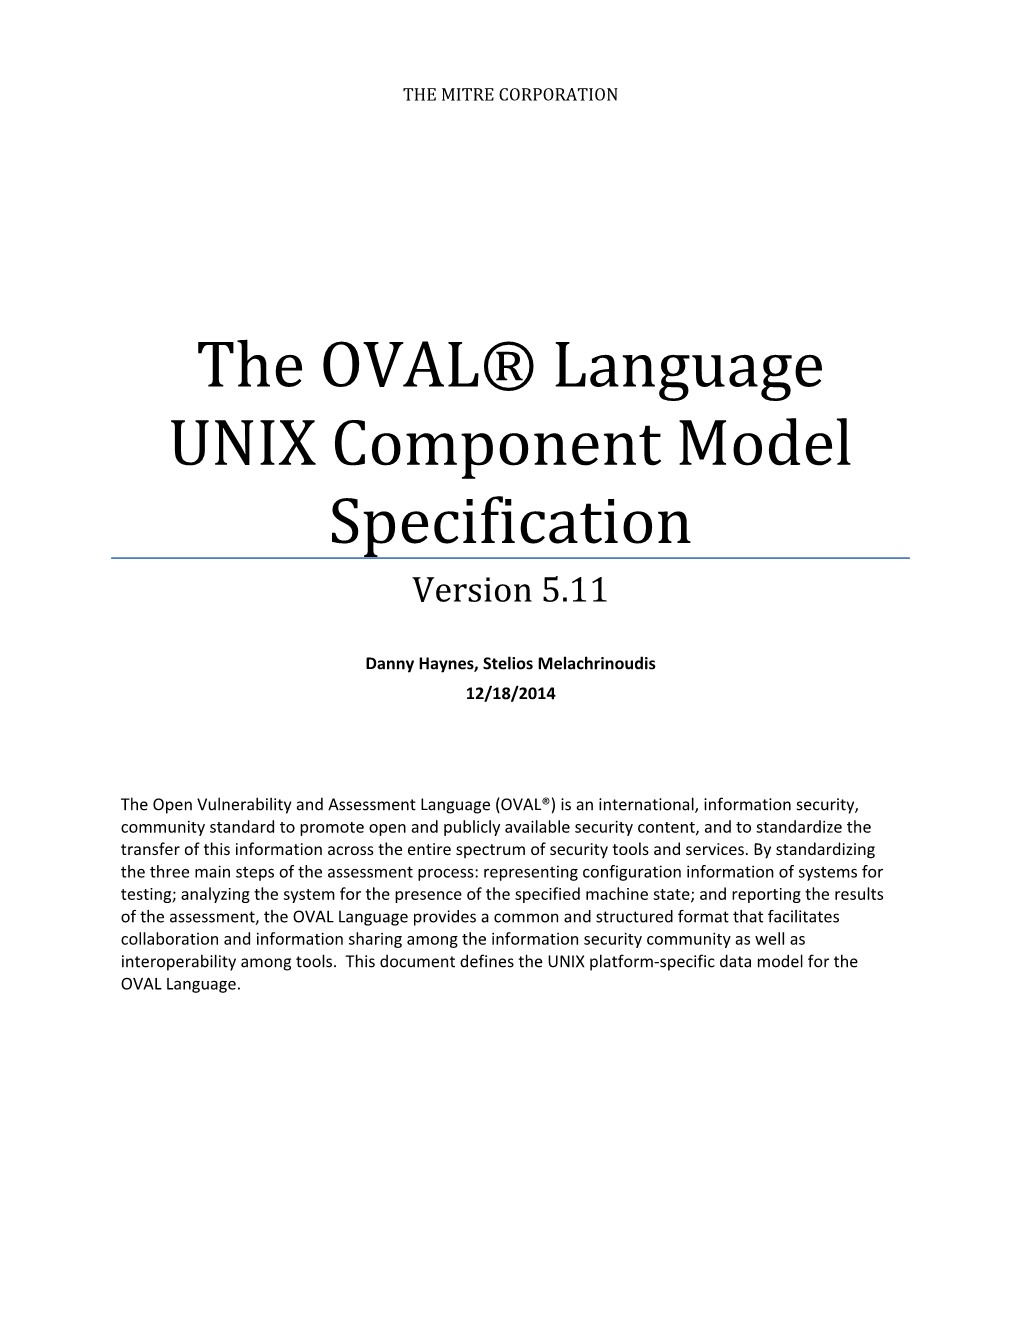 The OVAL Language UNIX Component Model Specification